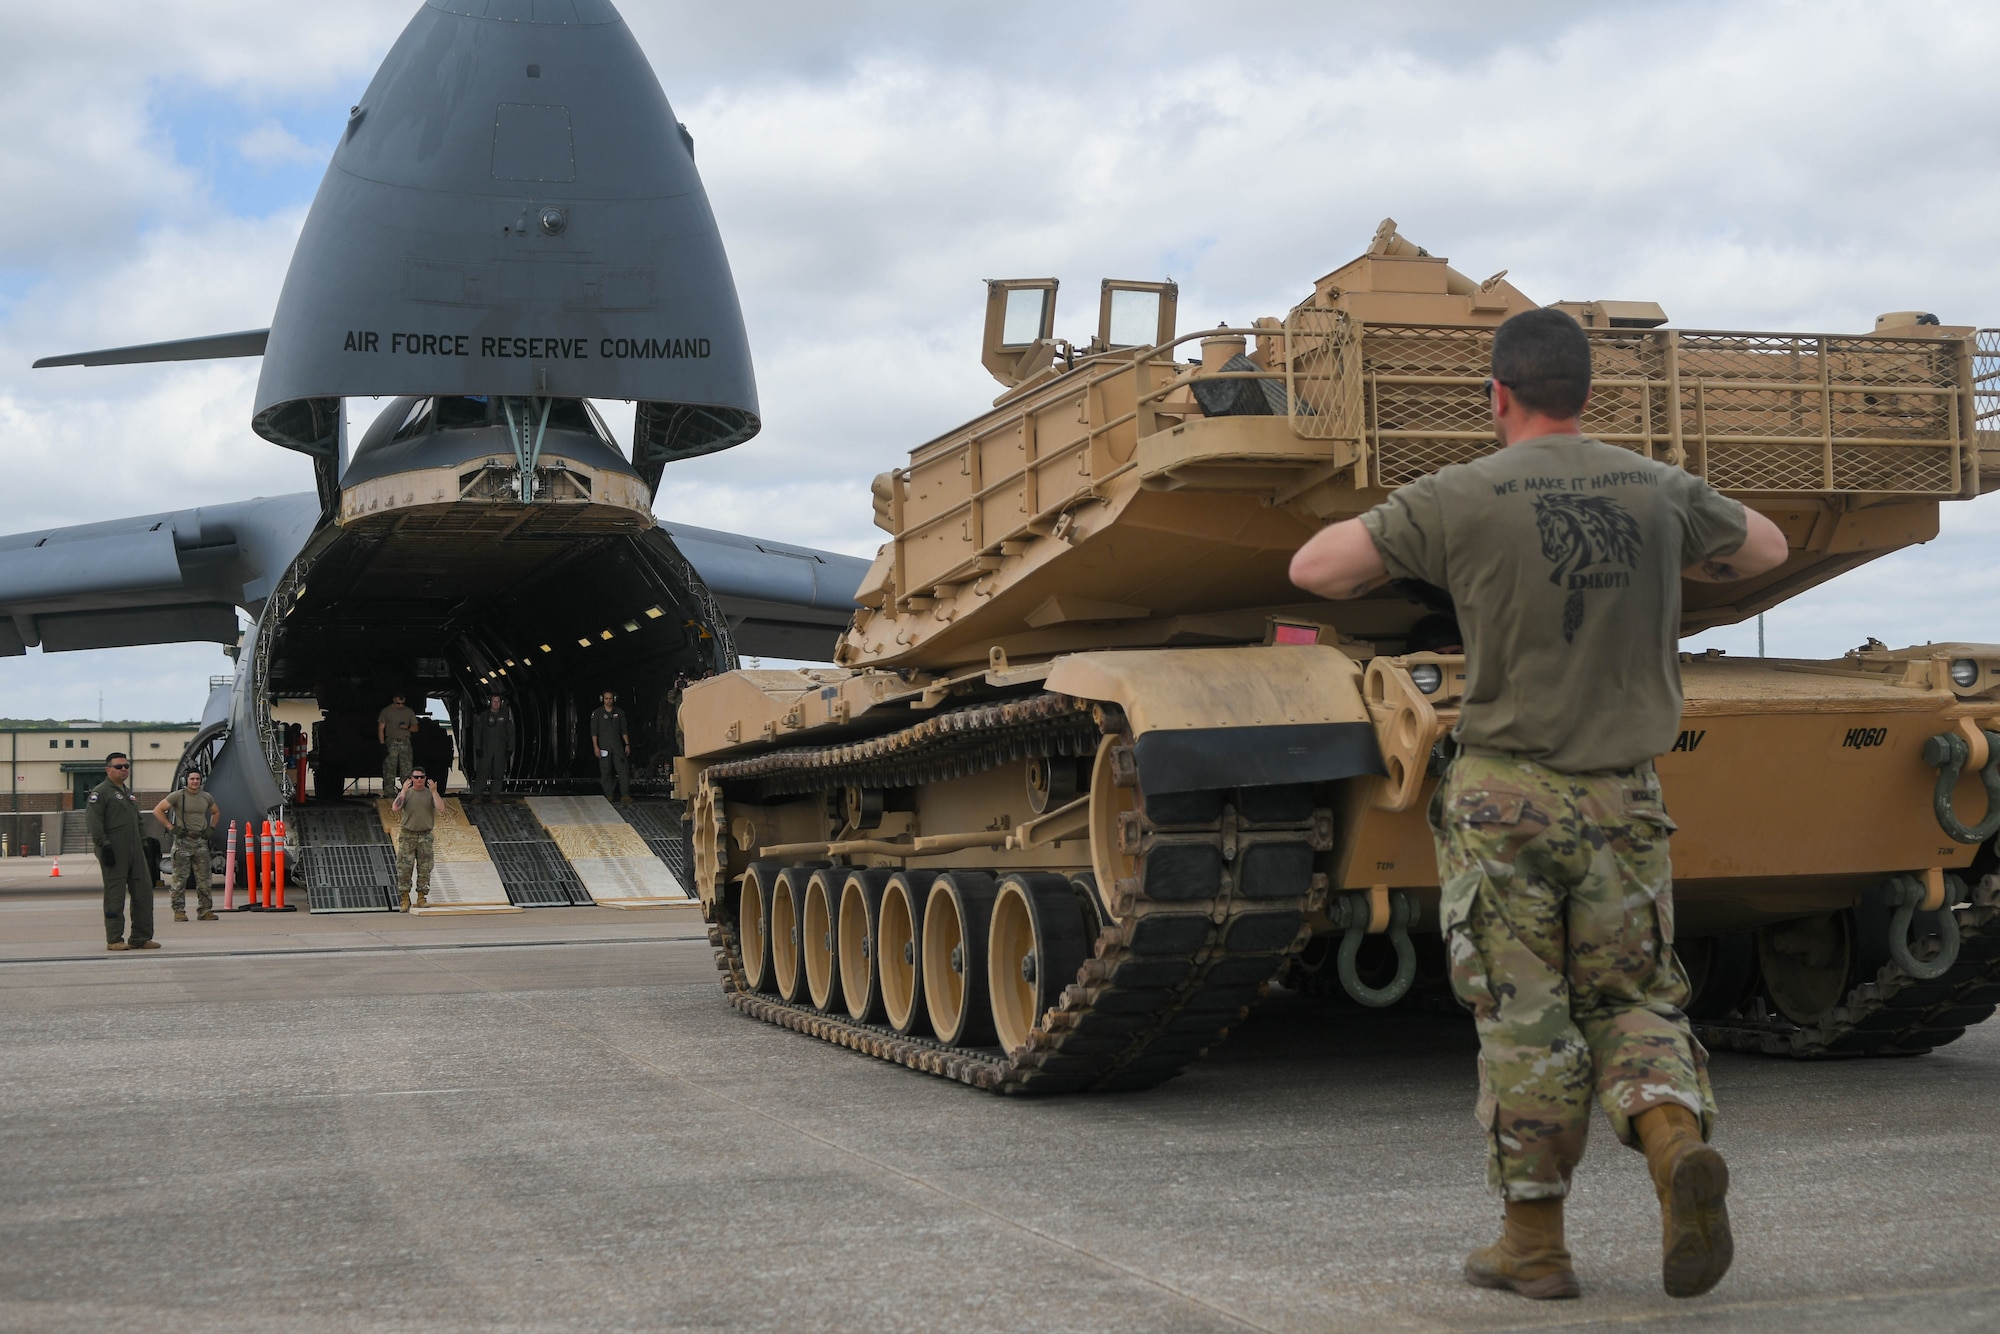 Tank crewmen assigned to the 1st Armored Brigade Combat Team, 1st Cavalry Division, guide an Abrams M1A2 System Enhancement Program Version 3 tank assigned to the 2nd Battalion, 12th Cavalry Regiment, onto a 433rd Airlift Wing C-5M Super Galaxy aircraft at Robert Gray Army Airfield, Fort Hood, Texas, April 20, 2022. The Abrams M1A2 SEPv3 was flown to Joint Base San Antonio-Randolph, Texas, to be displayed as part of The Great Texas Air Show, April 23-24, 2022. (U.S. Air Force photo by Airman 1st Class Mark Colmenares)